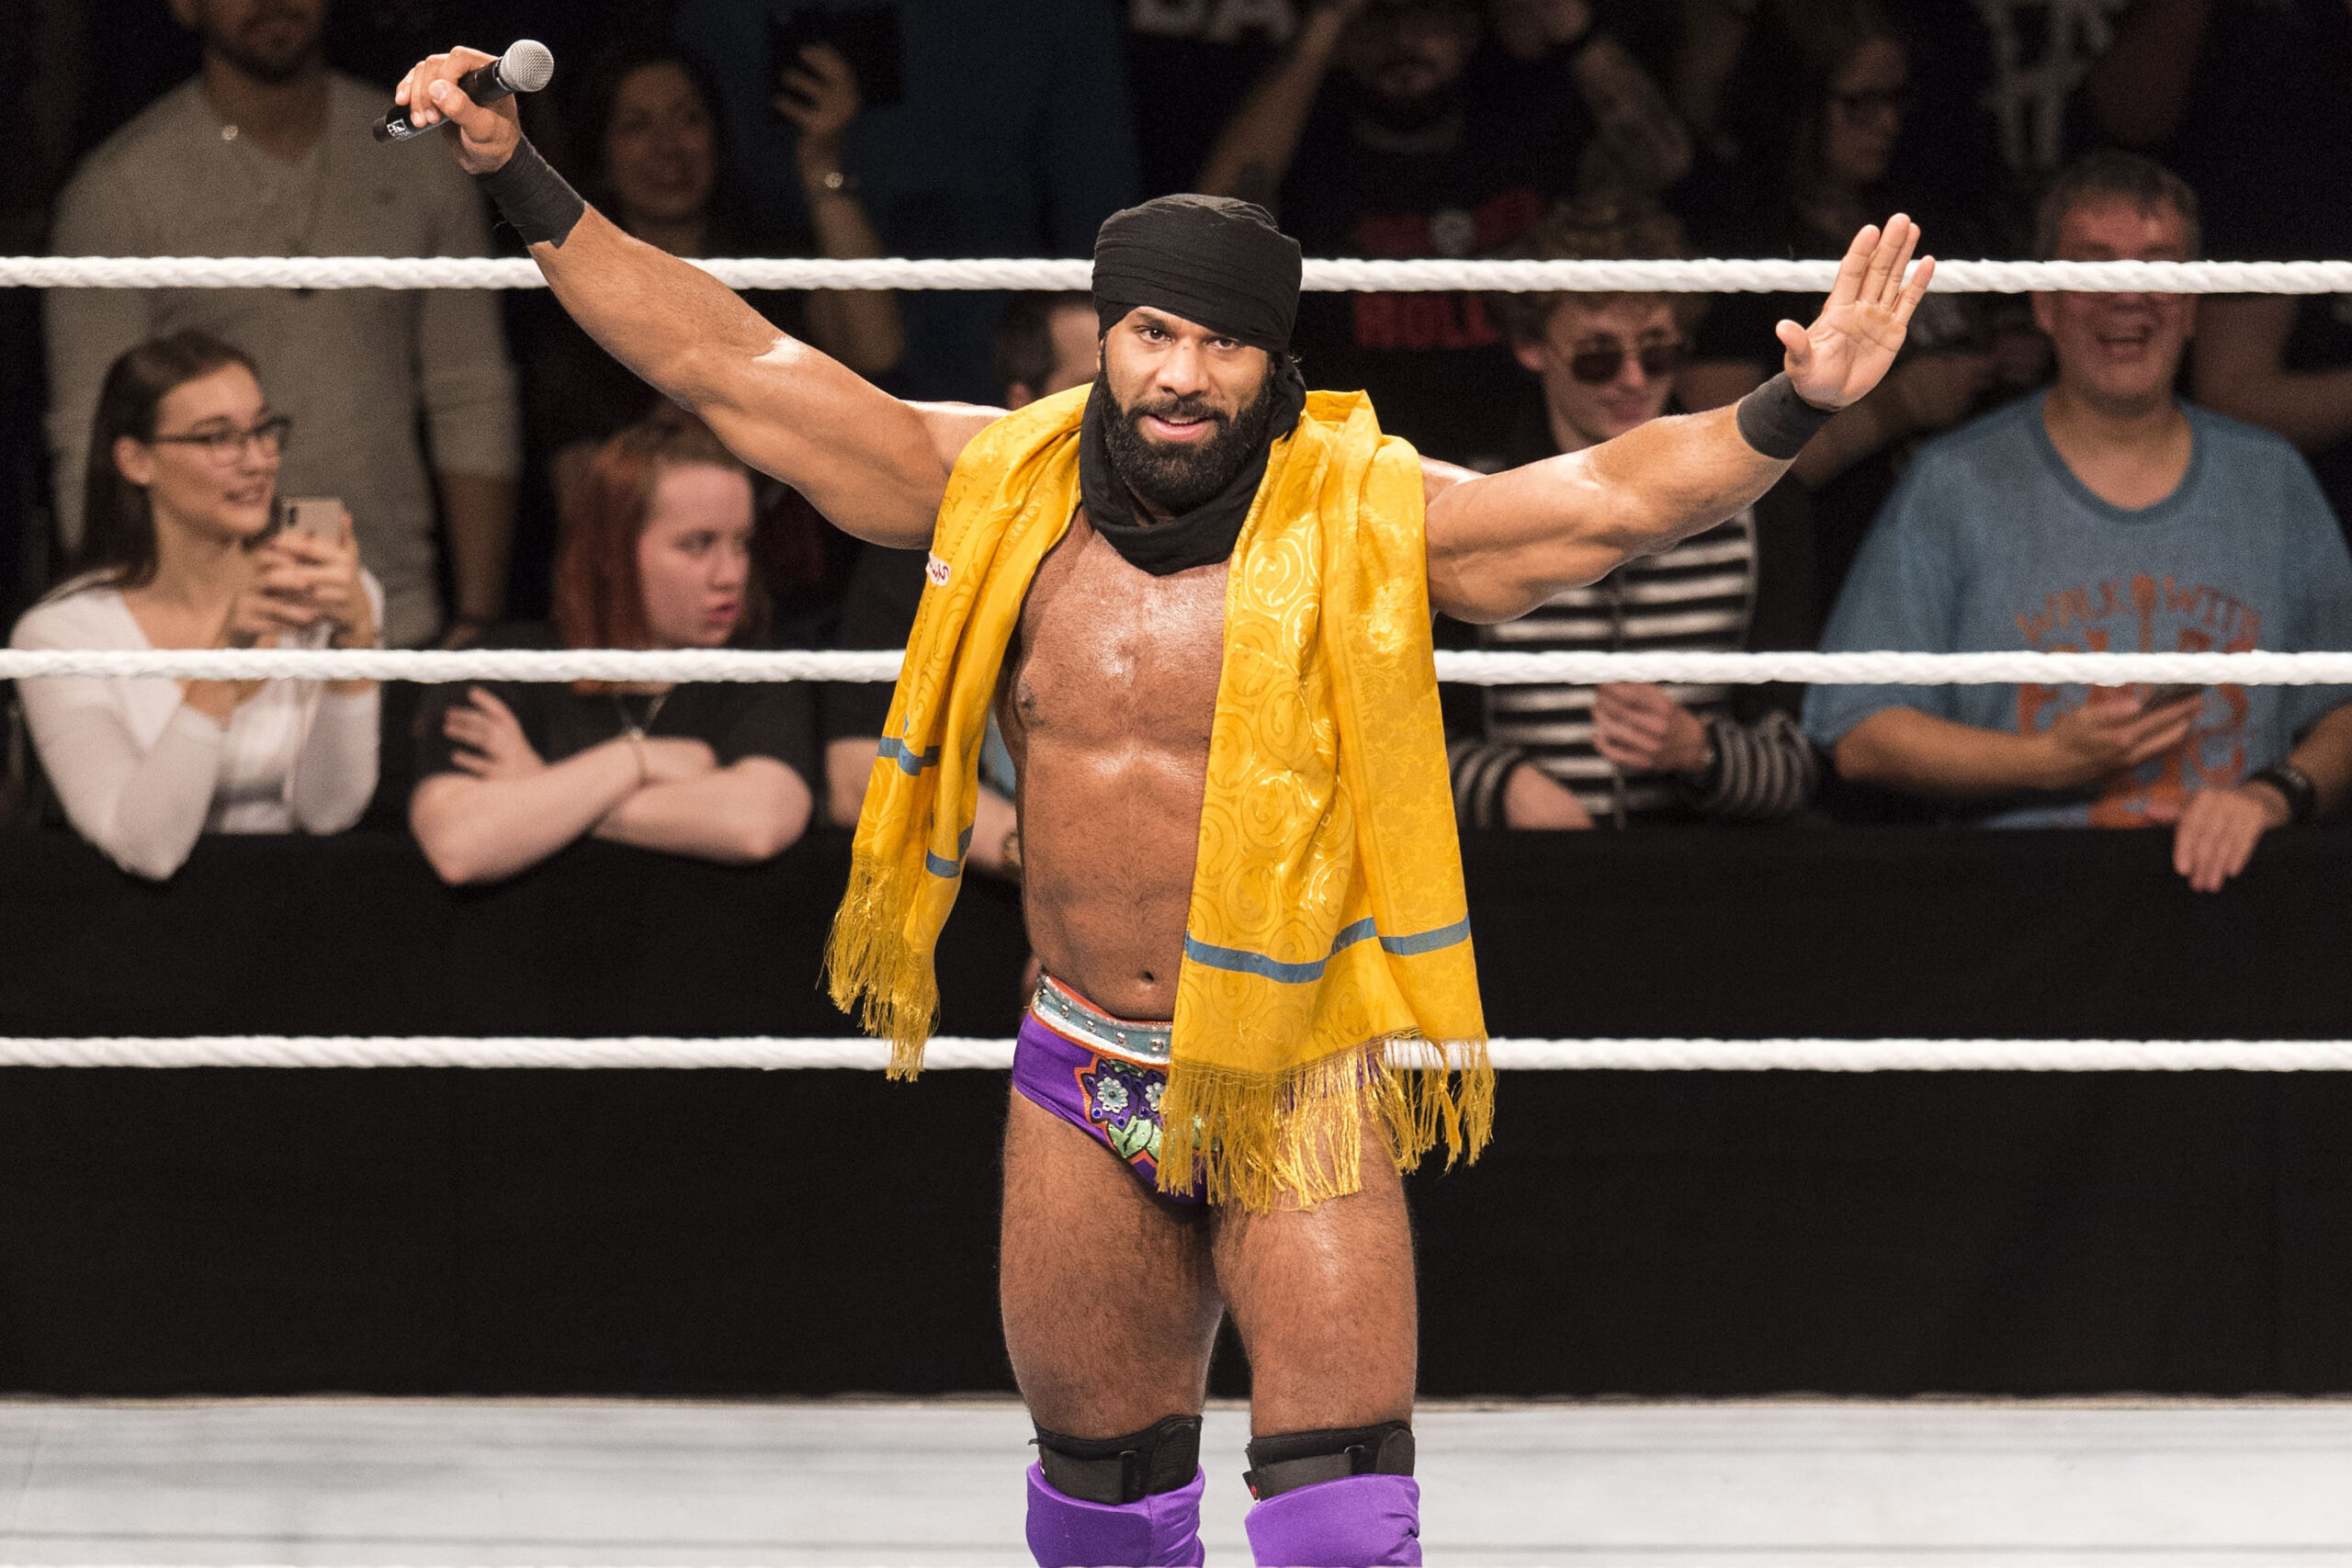 WWE Shakeup: The Release of Jinder Mahal and the Fall of Indus Sher